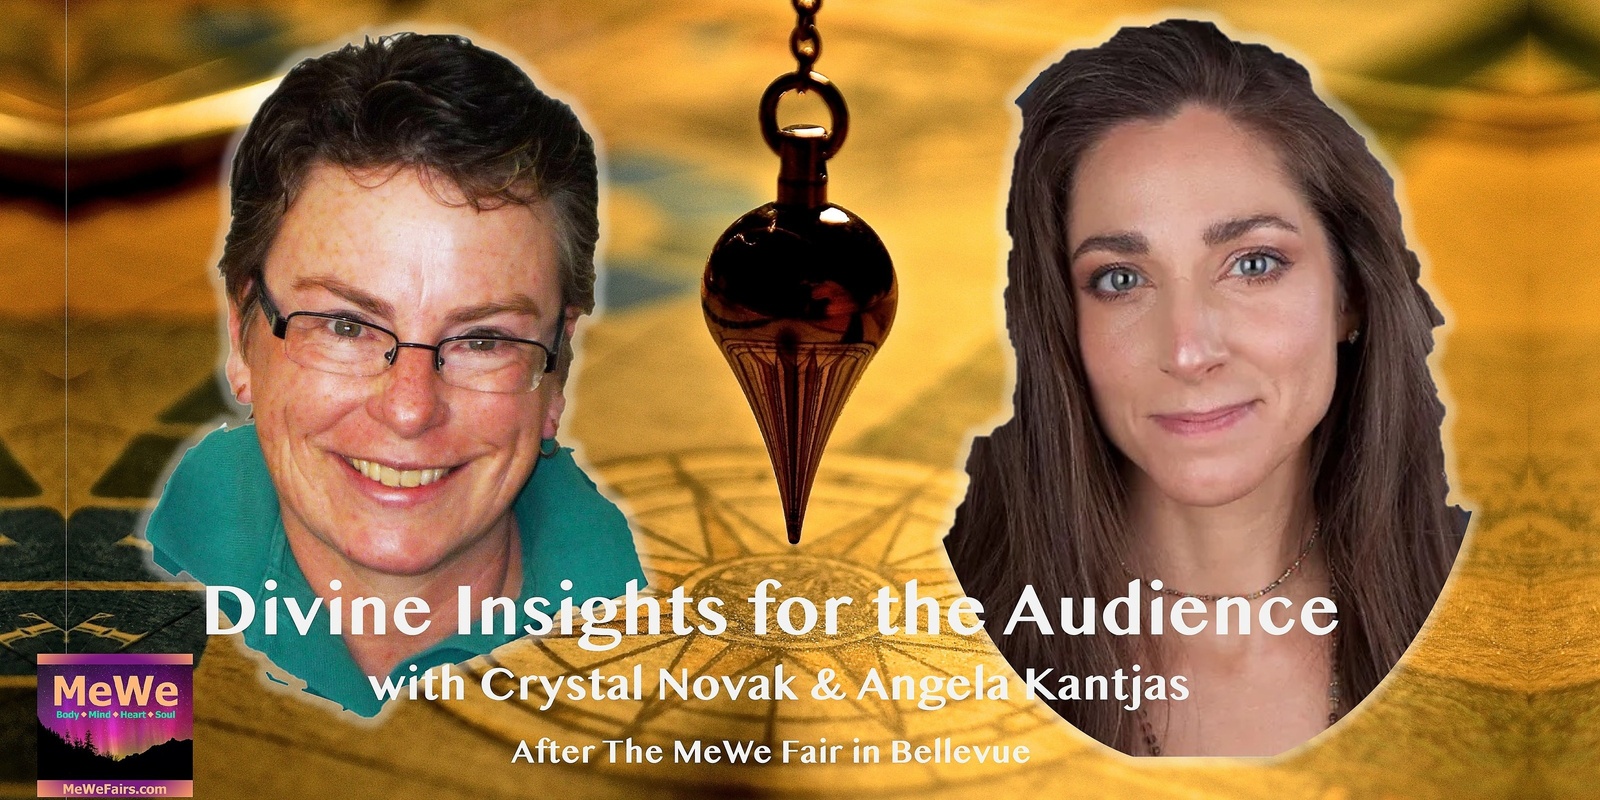 Banner image for Divine Insights for the Audience After the MeWe Fair + Gem Show in Bellevue